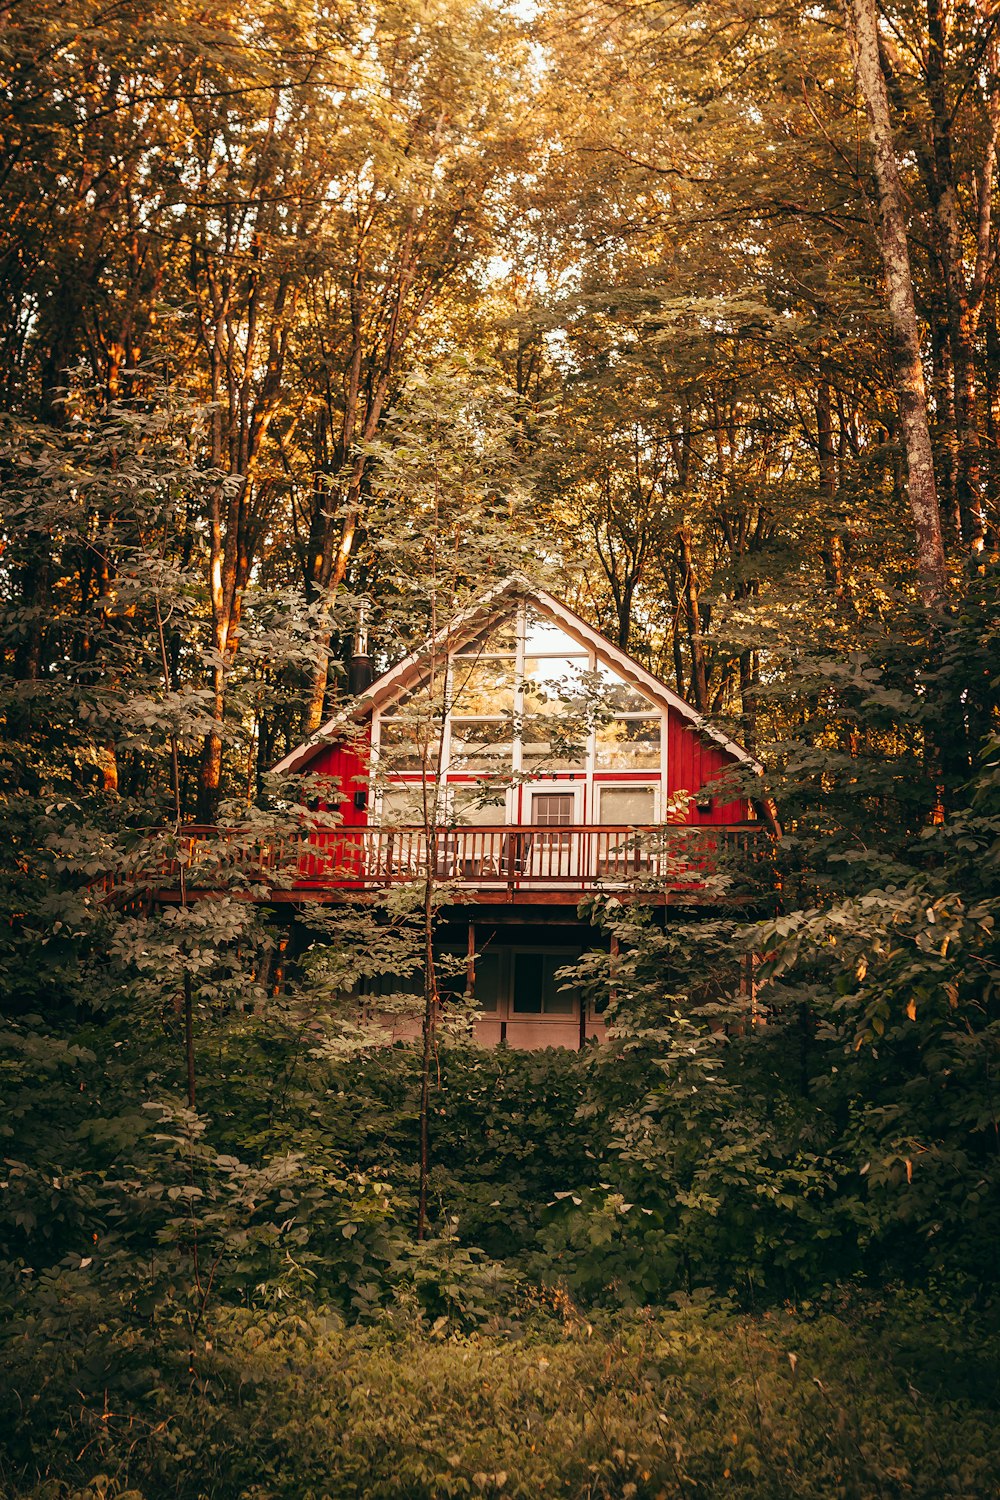 red and white wooden house in the middle of forest